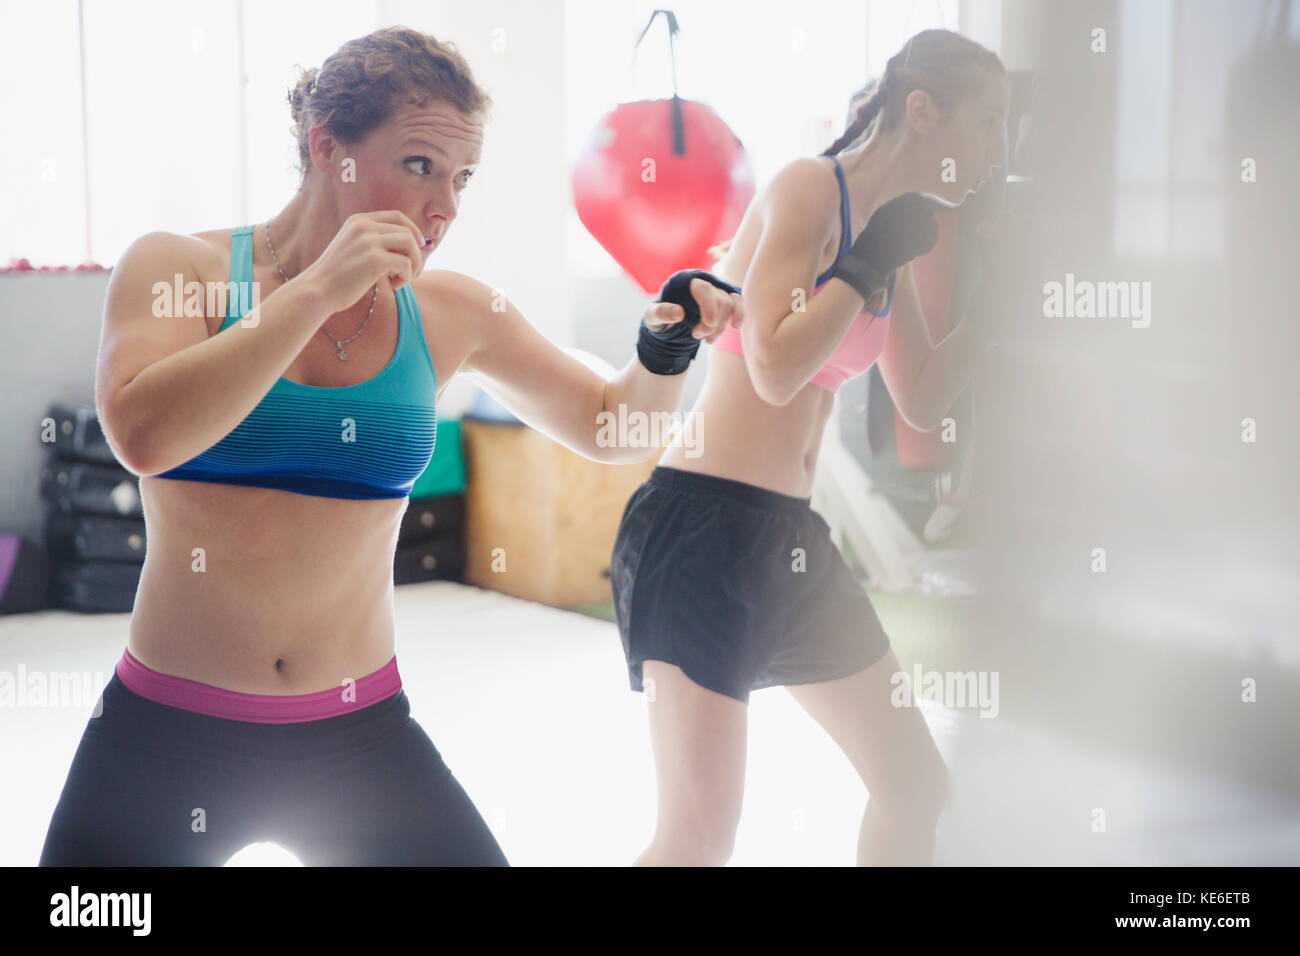 Determinate pugili donne che si shadowboxing in palestra Foto Stock